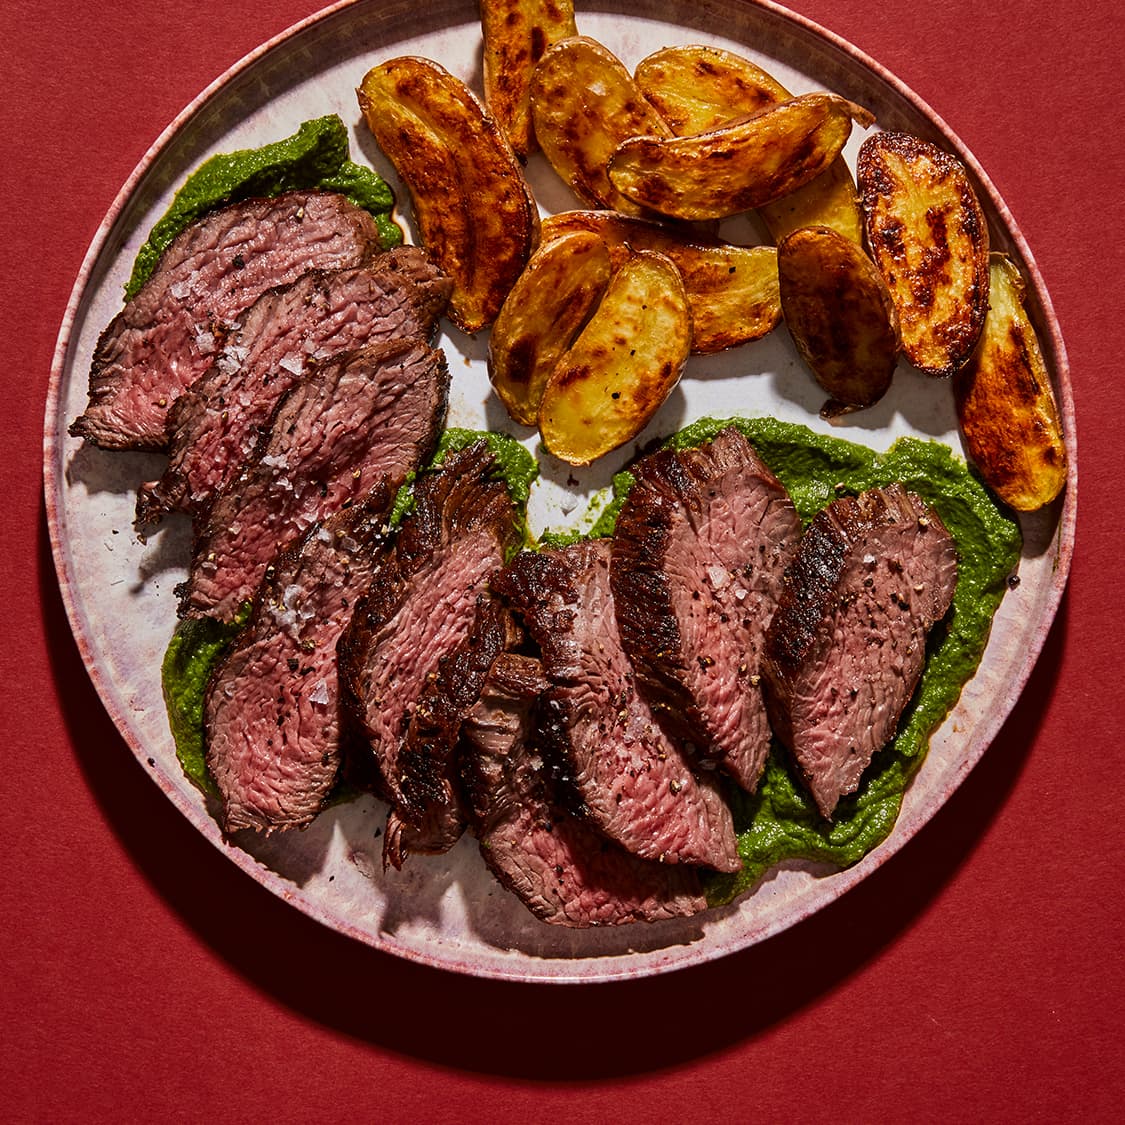 https://fleishigs.com/images/mobile-app/recipes/760-list-sous-vide-oyster-steak-with-blistered-fingerling-potatoes-with-cilantro-chimichurri.jpg